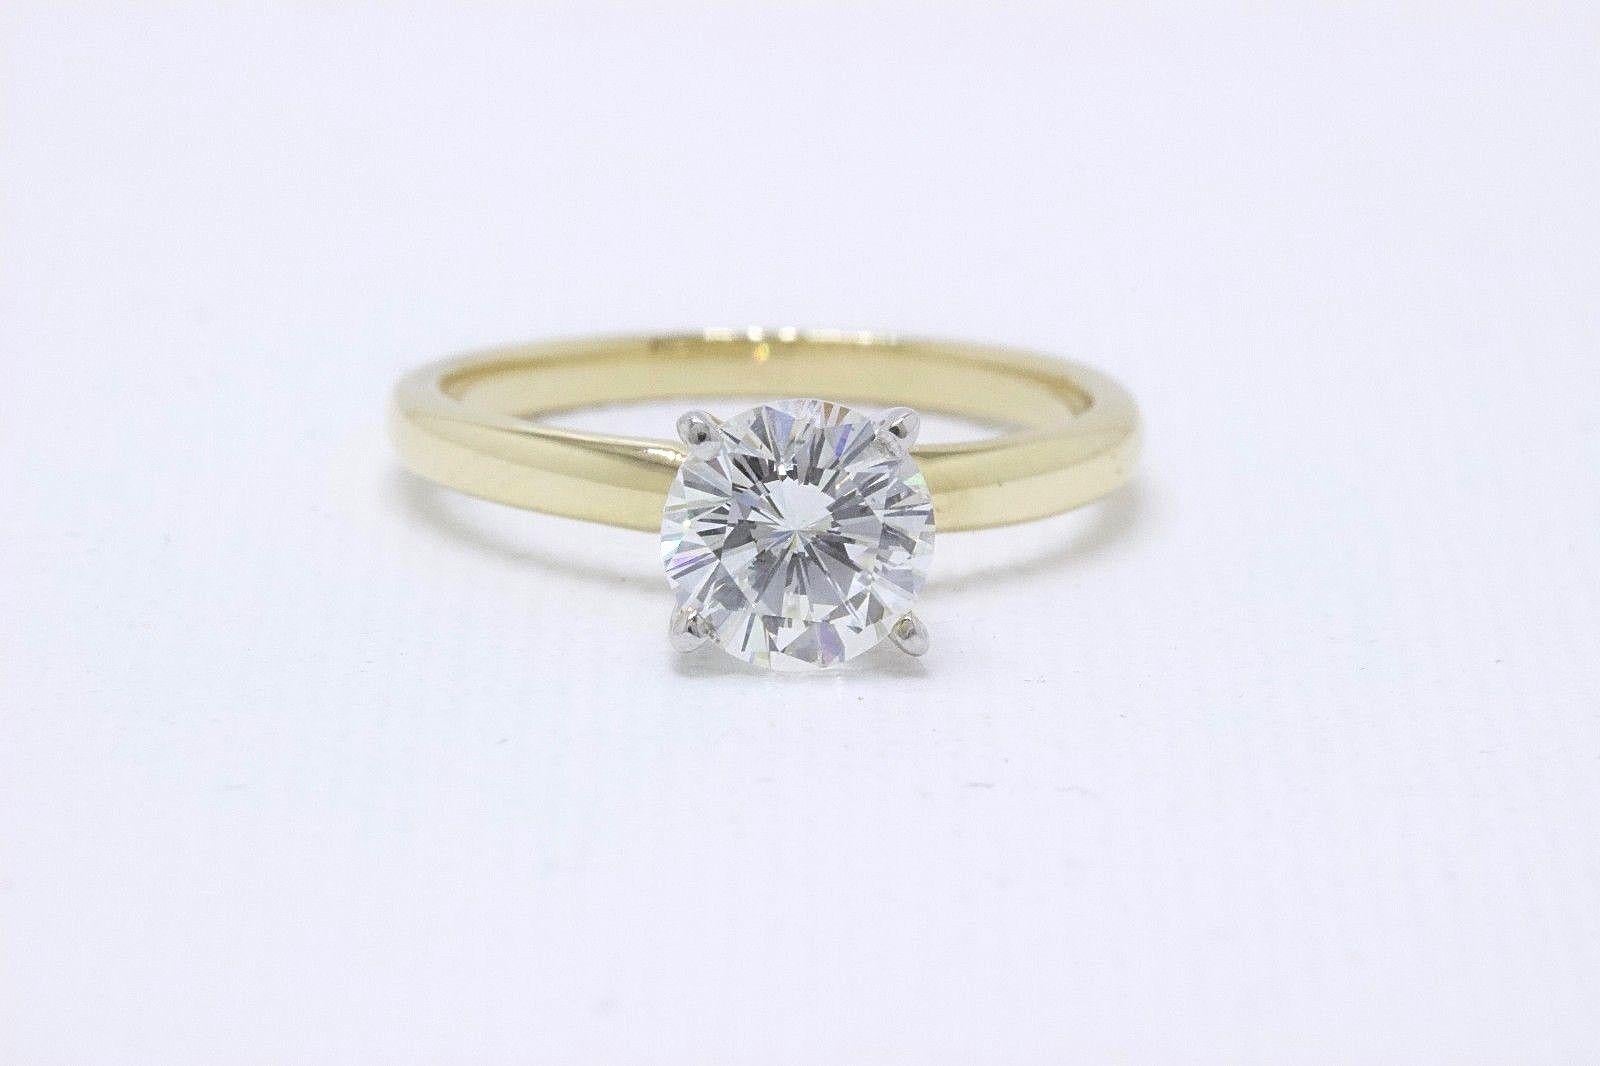 Leo Diamond Solitaire Engagement Ring Round Cut 0.99 CTS H VS2 14K Yellow Gold In Excellent Condition For Sale In San Diego, CA